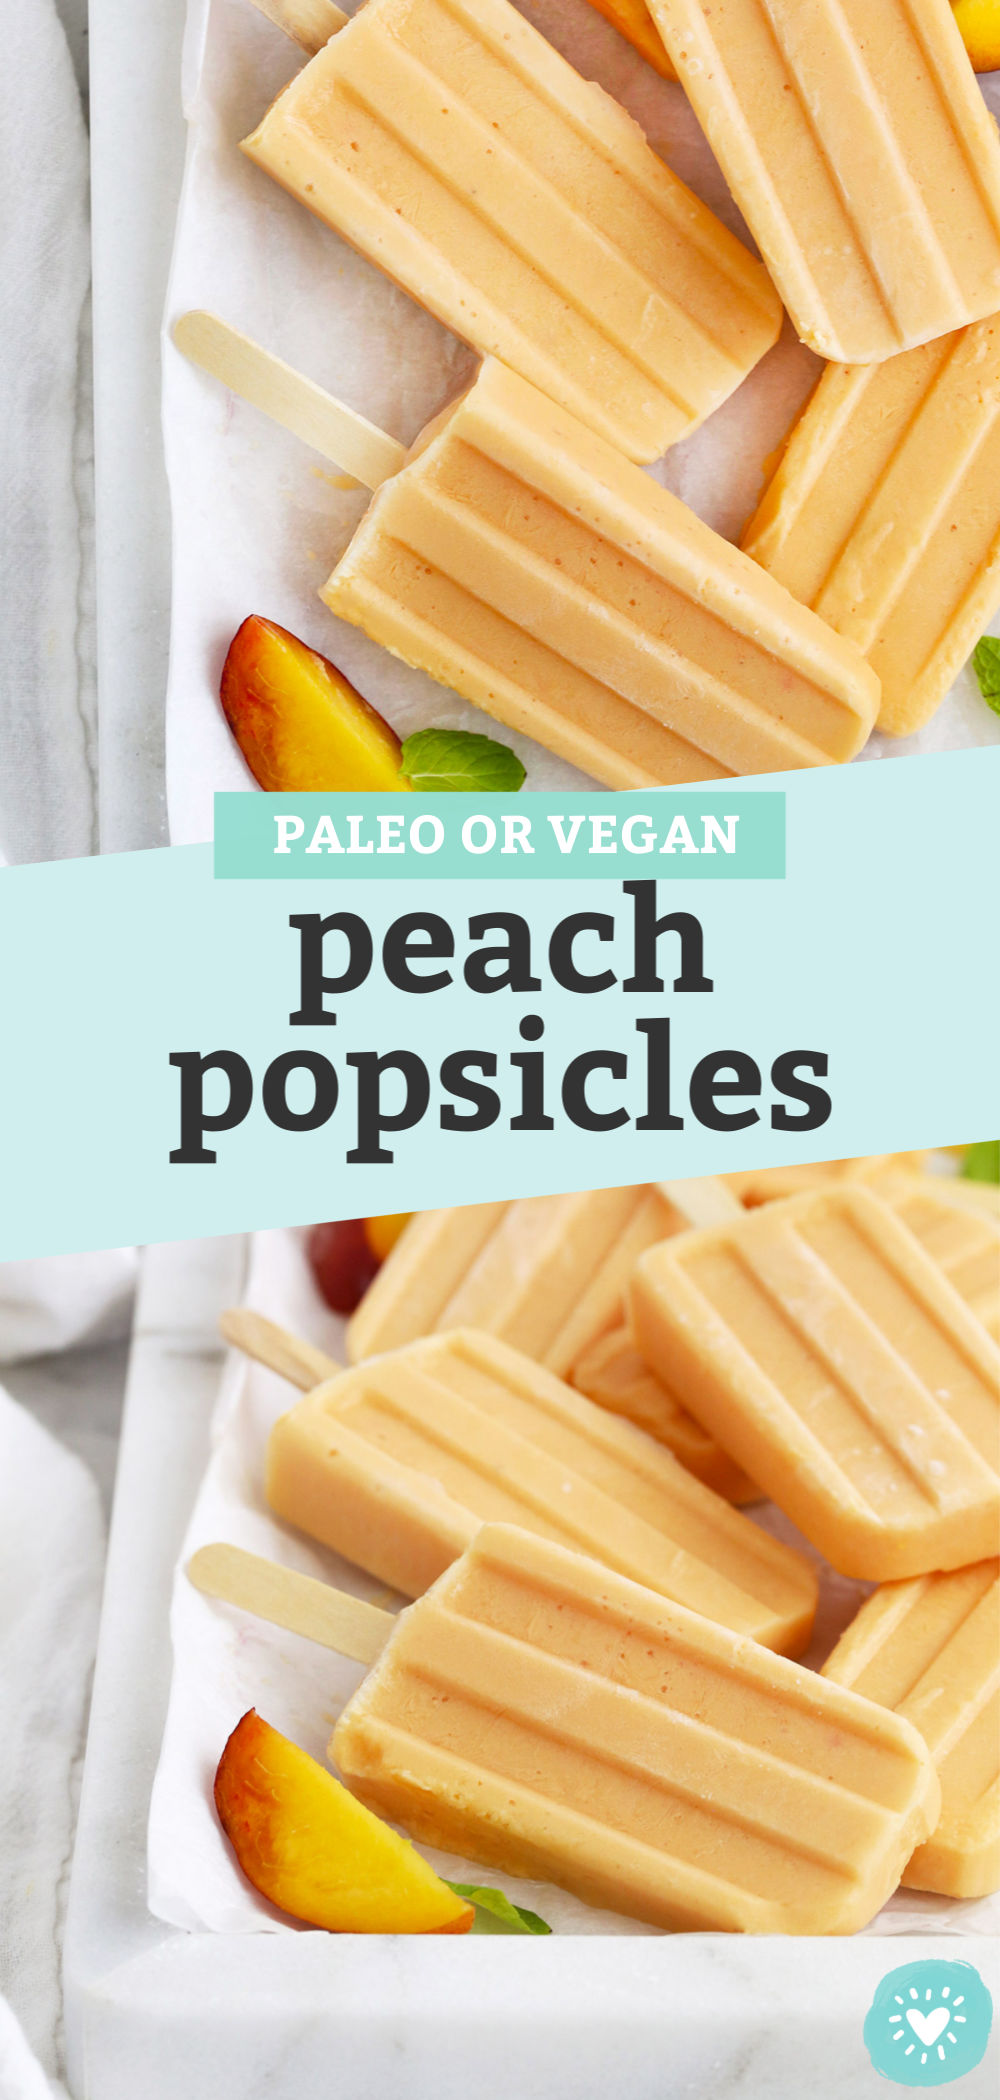 Collage of images of peach popsicles with text overlay that reads "Paleo or Vegan Peach Popsicles"